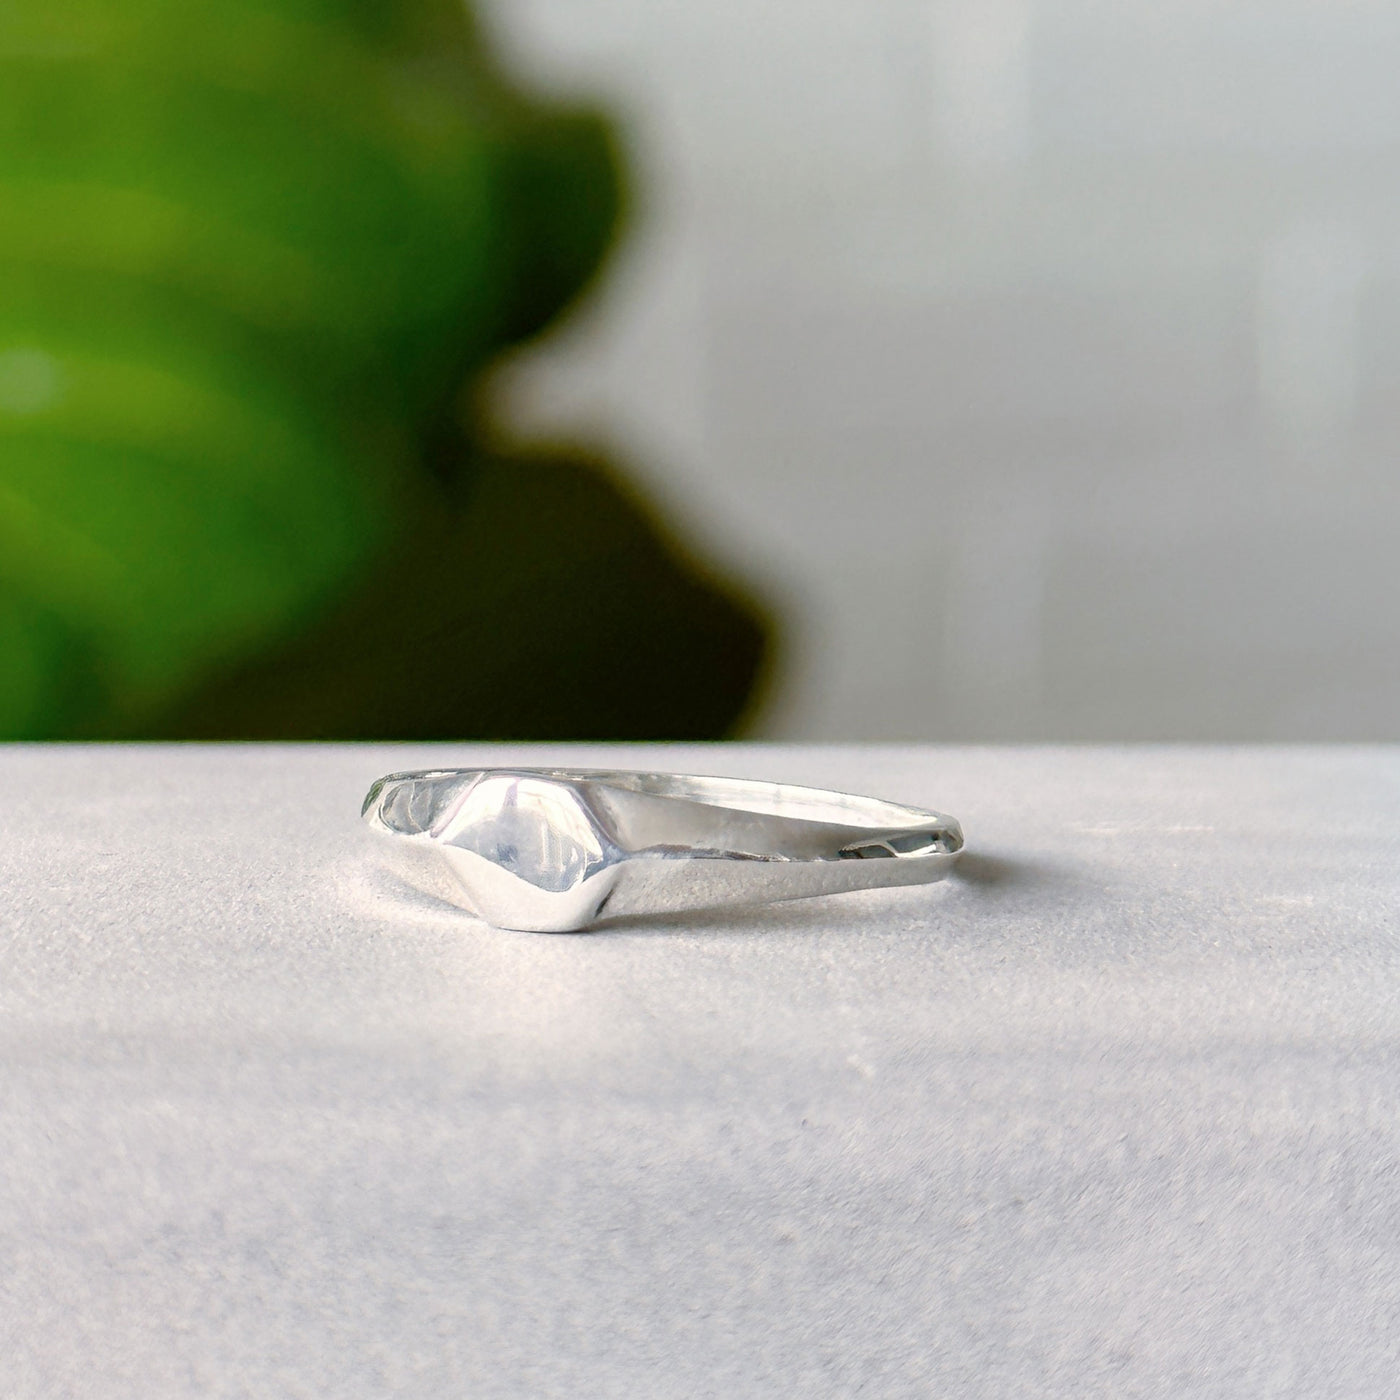 Astra Silver Signet Ring on a gray neutral background, side angle